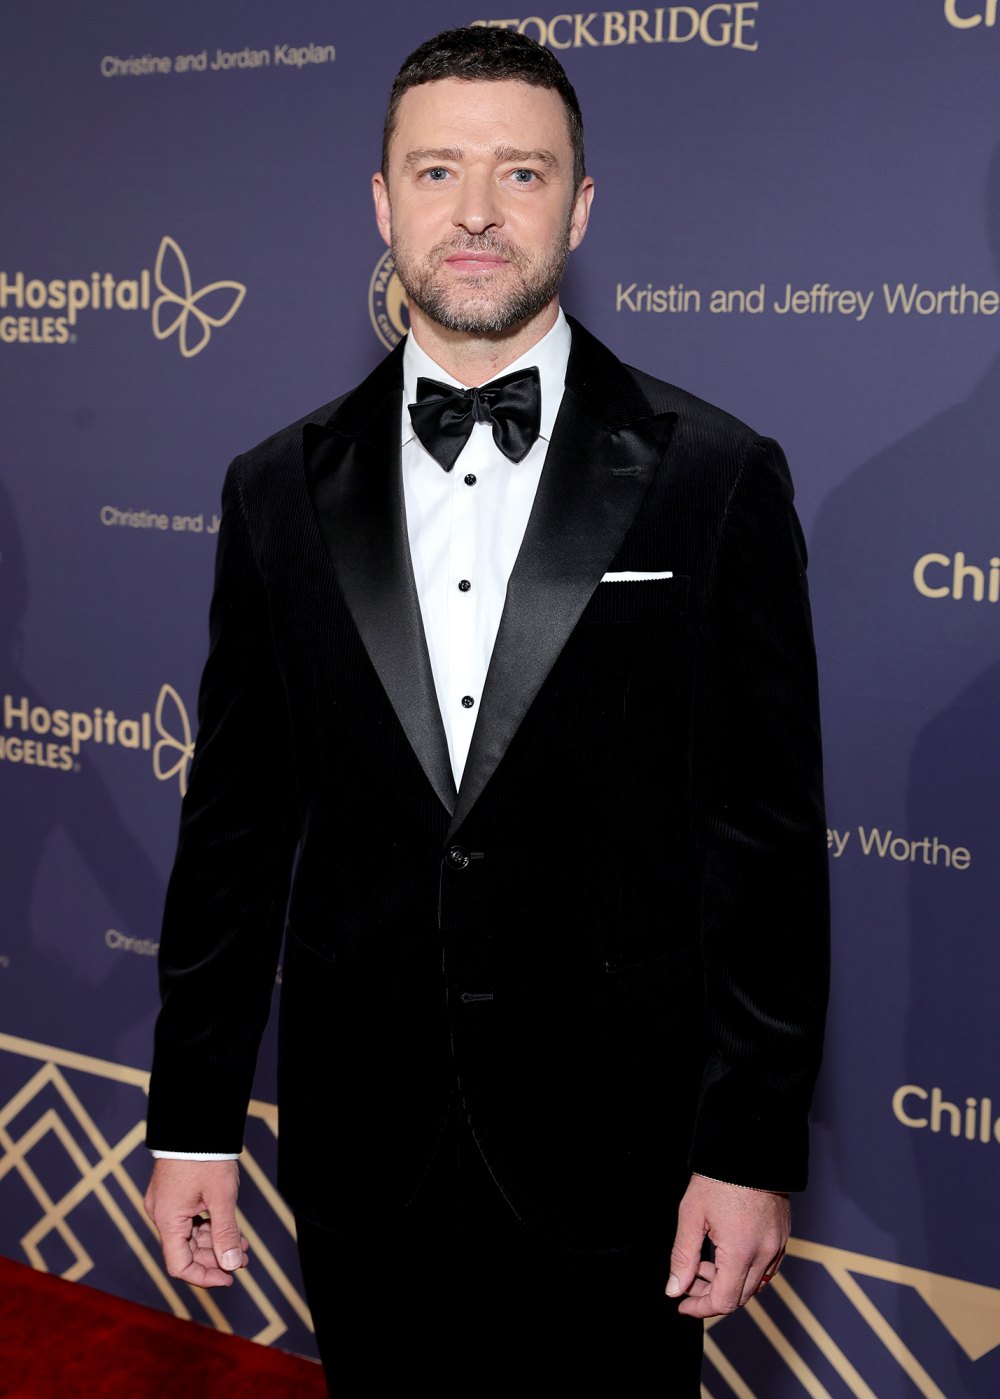 Justin Timberlake Addresses DWI Arrest Charges After Hamptons Incident